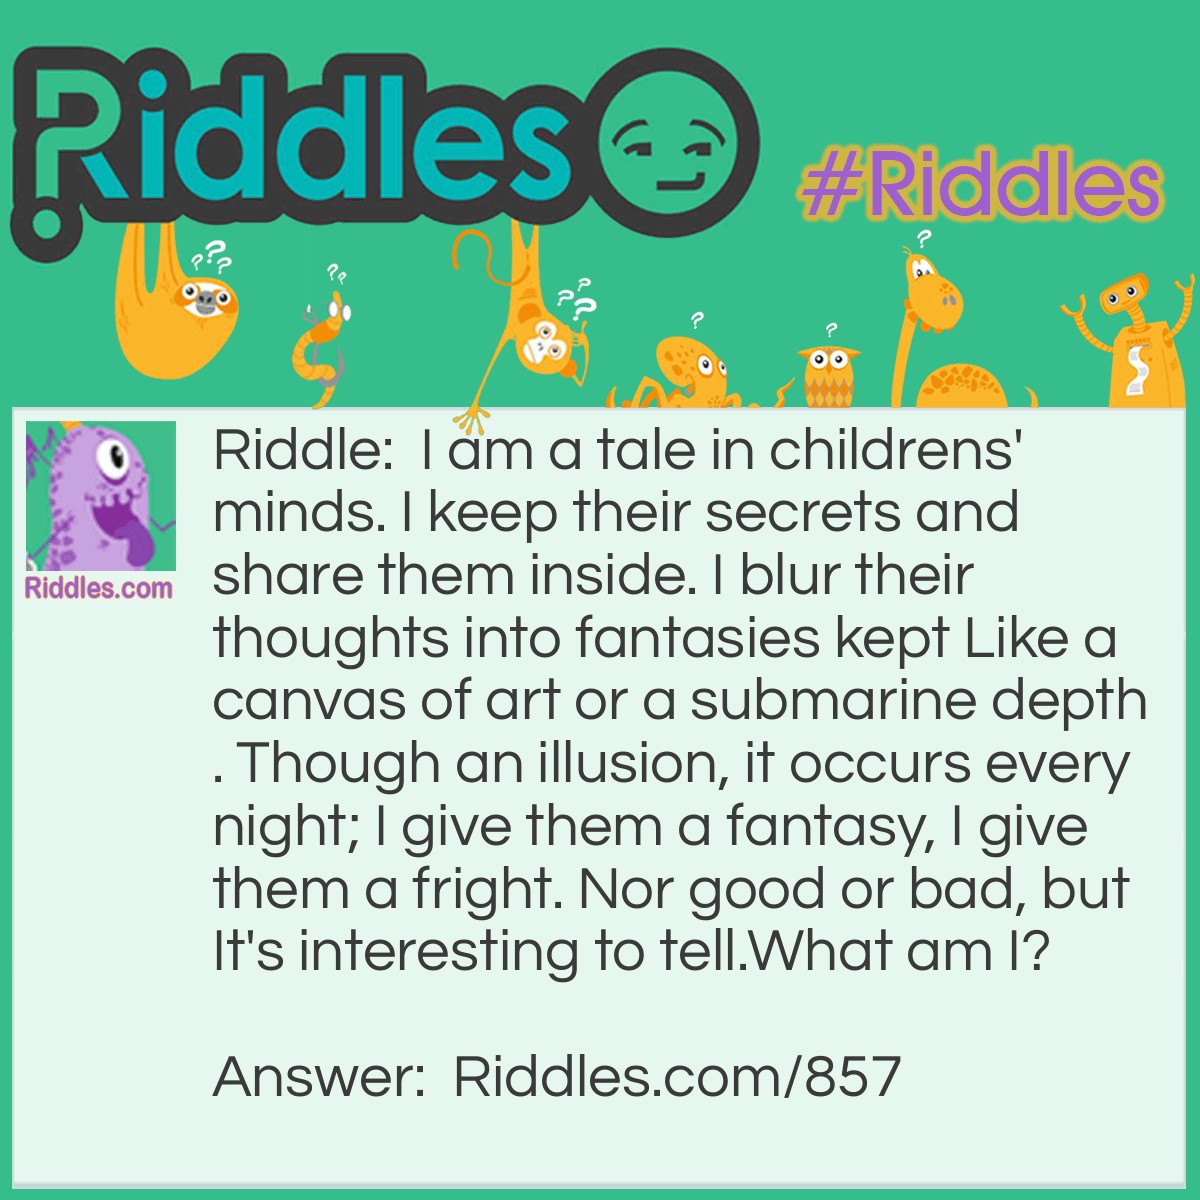 Riddle: I am a tale in children's minds. I keep their secrets and share them inside. I blur their thoughts into fantasies kept Like a canvas of art or a submarine depth. Though an illusion, occurs every night; I give them a fantasy, I give them a fright. Nor good or bad, but It's interesting to tell.
What am I? Answer: I am a dream.